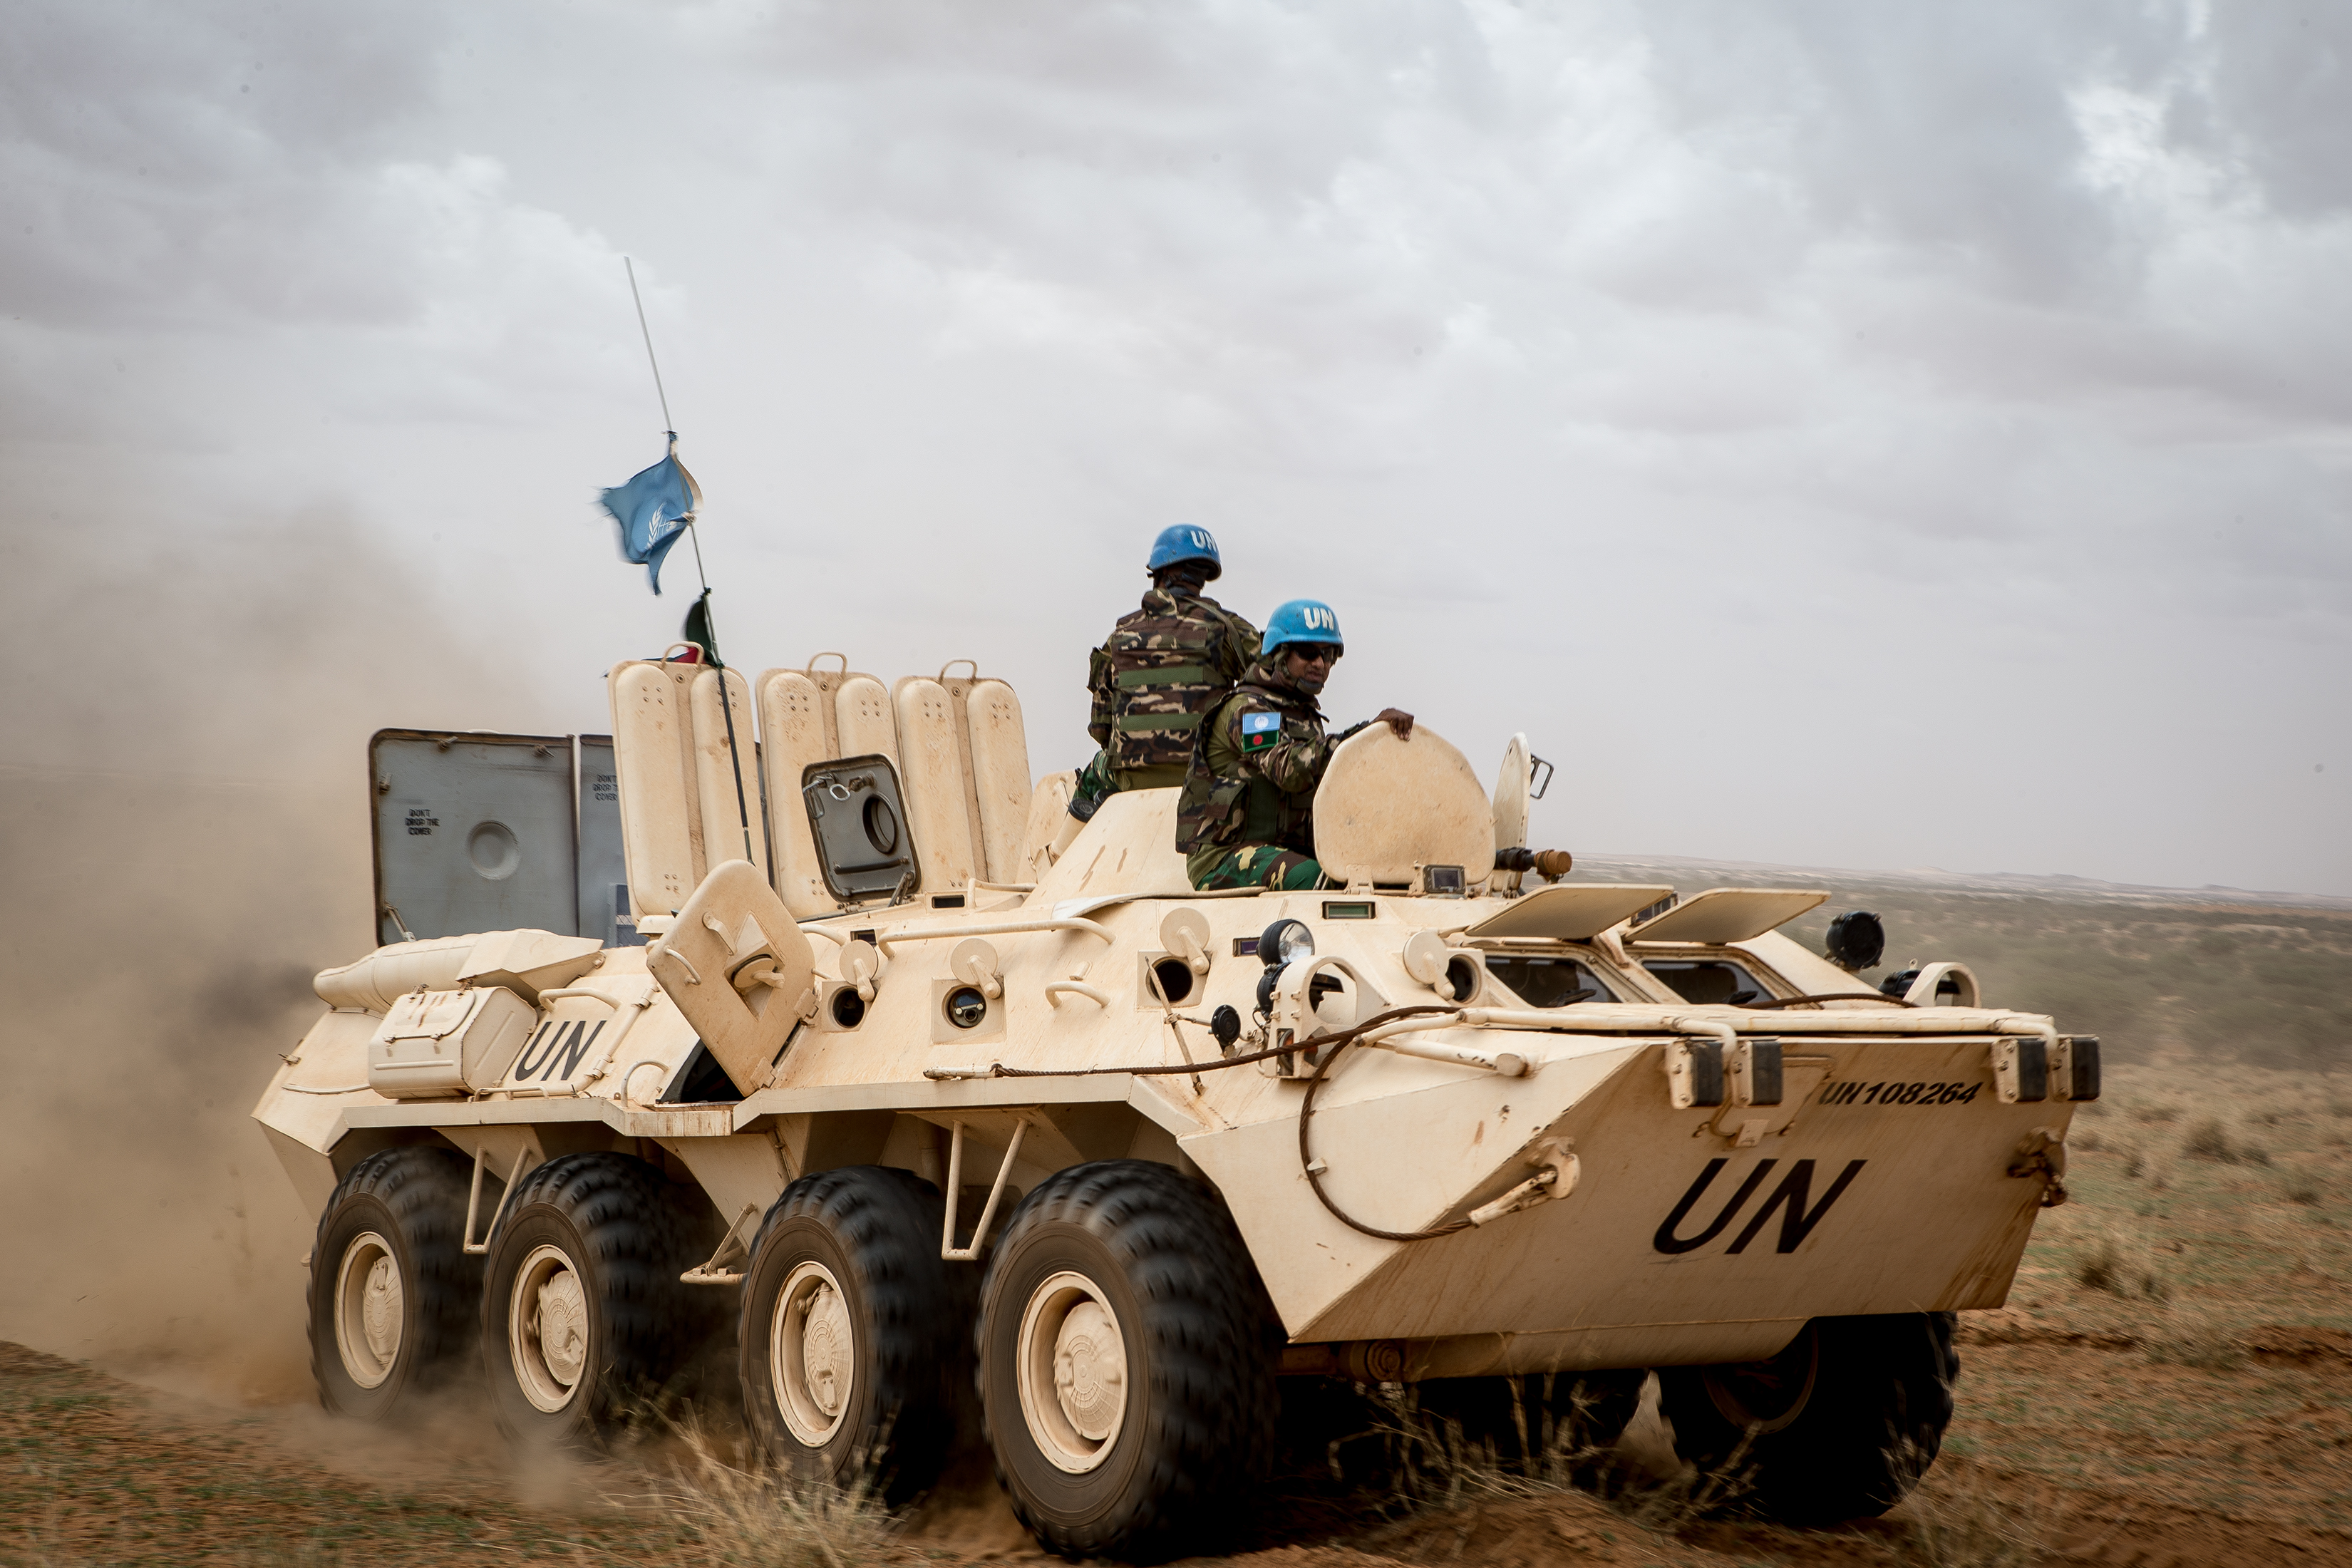 MINUSMA Peacekeepers, during Operation Military 'FRELANA' to protect civilians and their property.